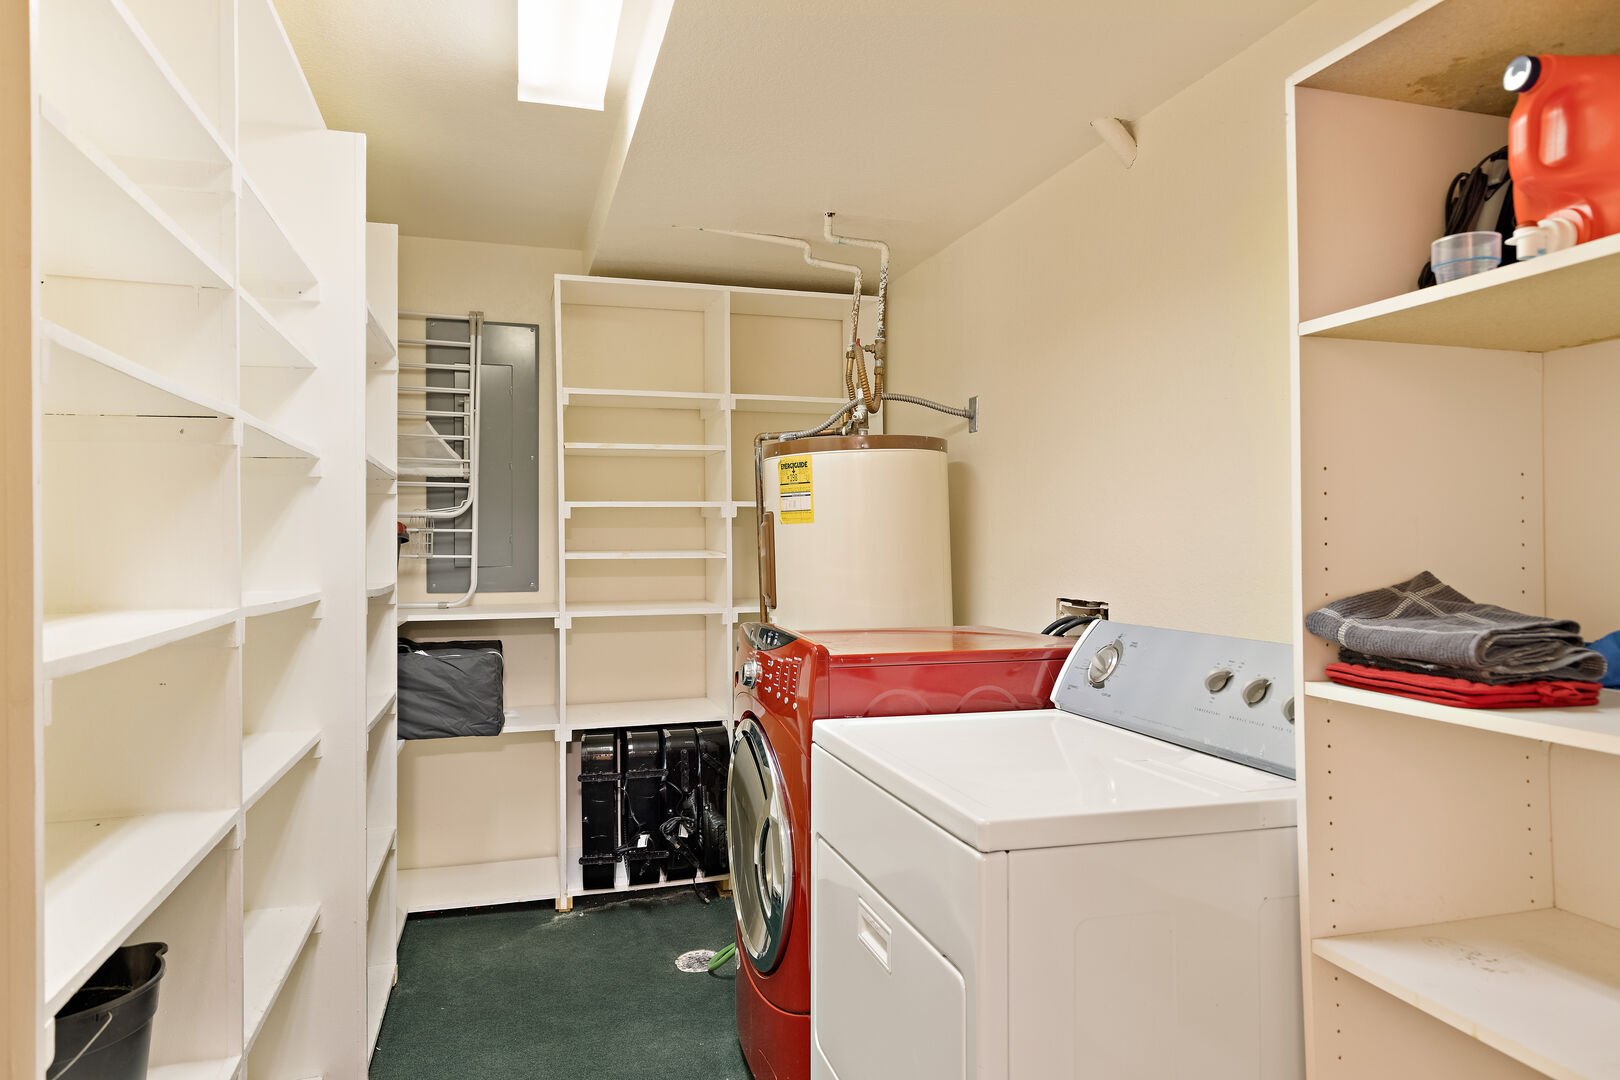 Grand Point Lodge ~ laundry room on lower level